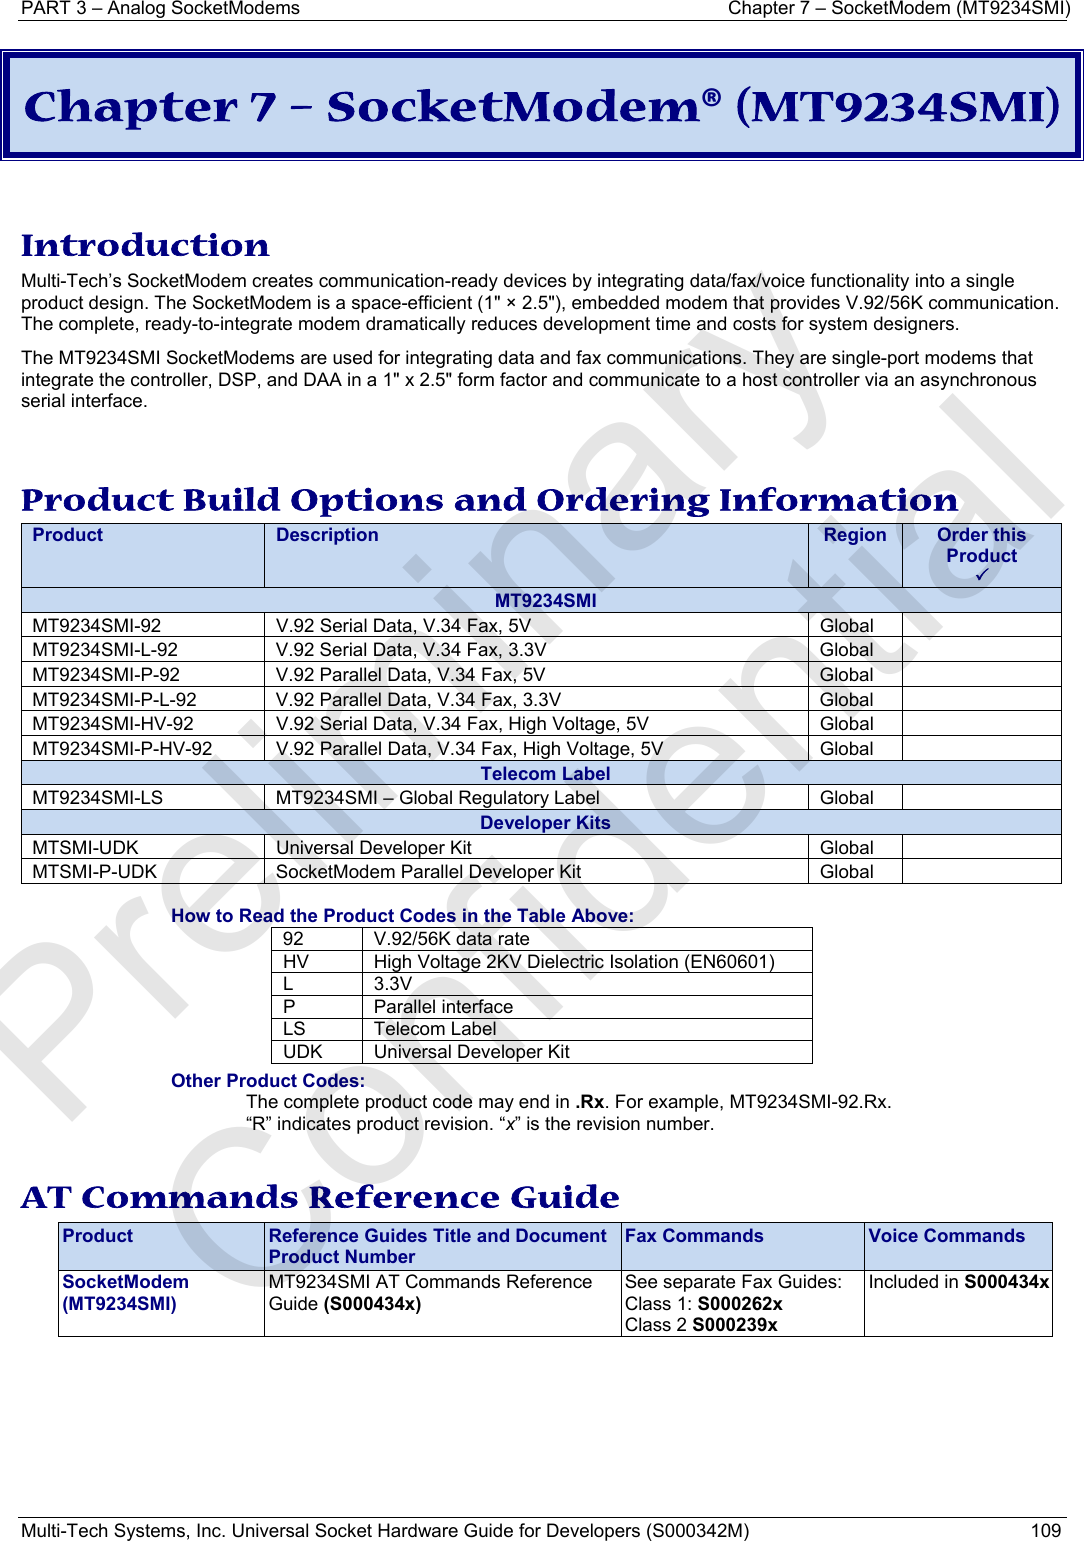 PART 3 – Analog SocketModems  Chapter 7 – SocketModem (MT9234SMI) Multi-Tech Systems, Inc. Universal Socket Hardware Guide for Developers (S000342M)  109  Chapter 7 – SocketModem® (MT9234SMI)   Introduction Multi-Tech’s SocketModem creates communication-ready devices by integrating data/fax/voice functionality into a single product design. The SocketModem is a space-efficient (1&quot; × 2.5&quot;), embedded modem that provides V.92/56K communication. The complete, ready-to-integrate modem dramatically reduces development time and costs for system designers.  The MT9234SMI SocketModems are used for integrating data and fax communications. They are single-port modems that integrate the controller, DSP, and DAA in a 1&quot; x 2.5&quot; form factor and communicate to a host controller via an asynchronous serial interface.   Product Build Options and Ordering Information Product  Description  Region  Order this Product 3MT9234SMI MT9234SMI-92  V.92 Serial Data, V.34 Fax, 5V  Global   MT9234SMI-L-92  V.92 Serial Data, V.34 Fax, 3.3V  Global   MT9234SMI-P-92  V.92 Parallel Data, V.34 Fax, 5V  Global   MT9234SMI-P-L-92  V.92 Parallel Data, V.34 Fax, 3.3V  Global   MT9234SMI-HV-92  V.92 Serial Data, V.34 Fax, High Voltage, 5V  Global   MT9234SMI-P-HV-92  V.92 Parallel Data, V.34 Fax, High Voltage, 5V  Global   Telecom Label MT9234SMI-LS  MT9234SMI – Global Regulatory Label  Global   Developer Kits MTSMI-UDK  Universal Developer Kit  Global   MTSMI-P-UDK  SocketModem Parallel Developer Kit  Global    How to Read the Product Codes in the Table Above: 92  V.92/56K data rate HV  High Voltage 2KV Dielectric Isolation (EN60601) L   3.3V P Parallel interface LS Telecom Label UDK  Universal Developer Kit Other Product Codes: The complete product code may end in .Rx. For example, MT9234SMI-92.Rx.   “R” indicates product revision. “x” is the revision number.  AT Commands Reference Guide Product  Reference Guides Title and Document Product Number Fax Commands  Voice Commands SocketModem (MT9234SMI) MT9234SMI AT Commands Reference Guide (S000434x) See separate Fax Guides: Class 1: S000262x Class 2 S000239x Included in S000434x  Preliminary  Confidential